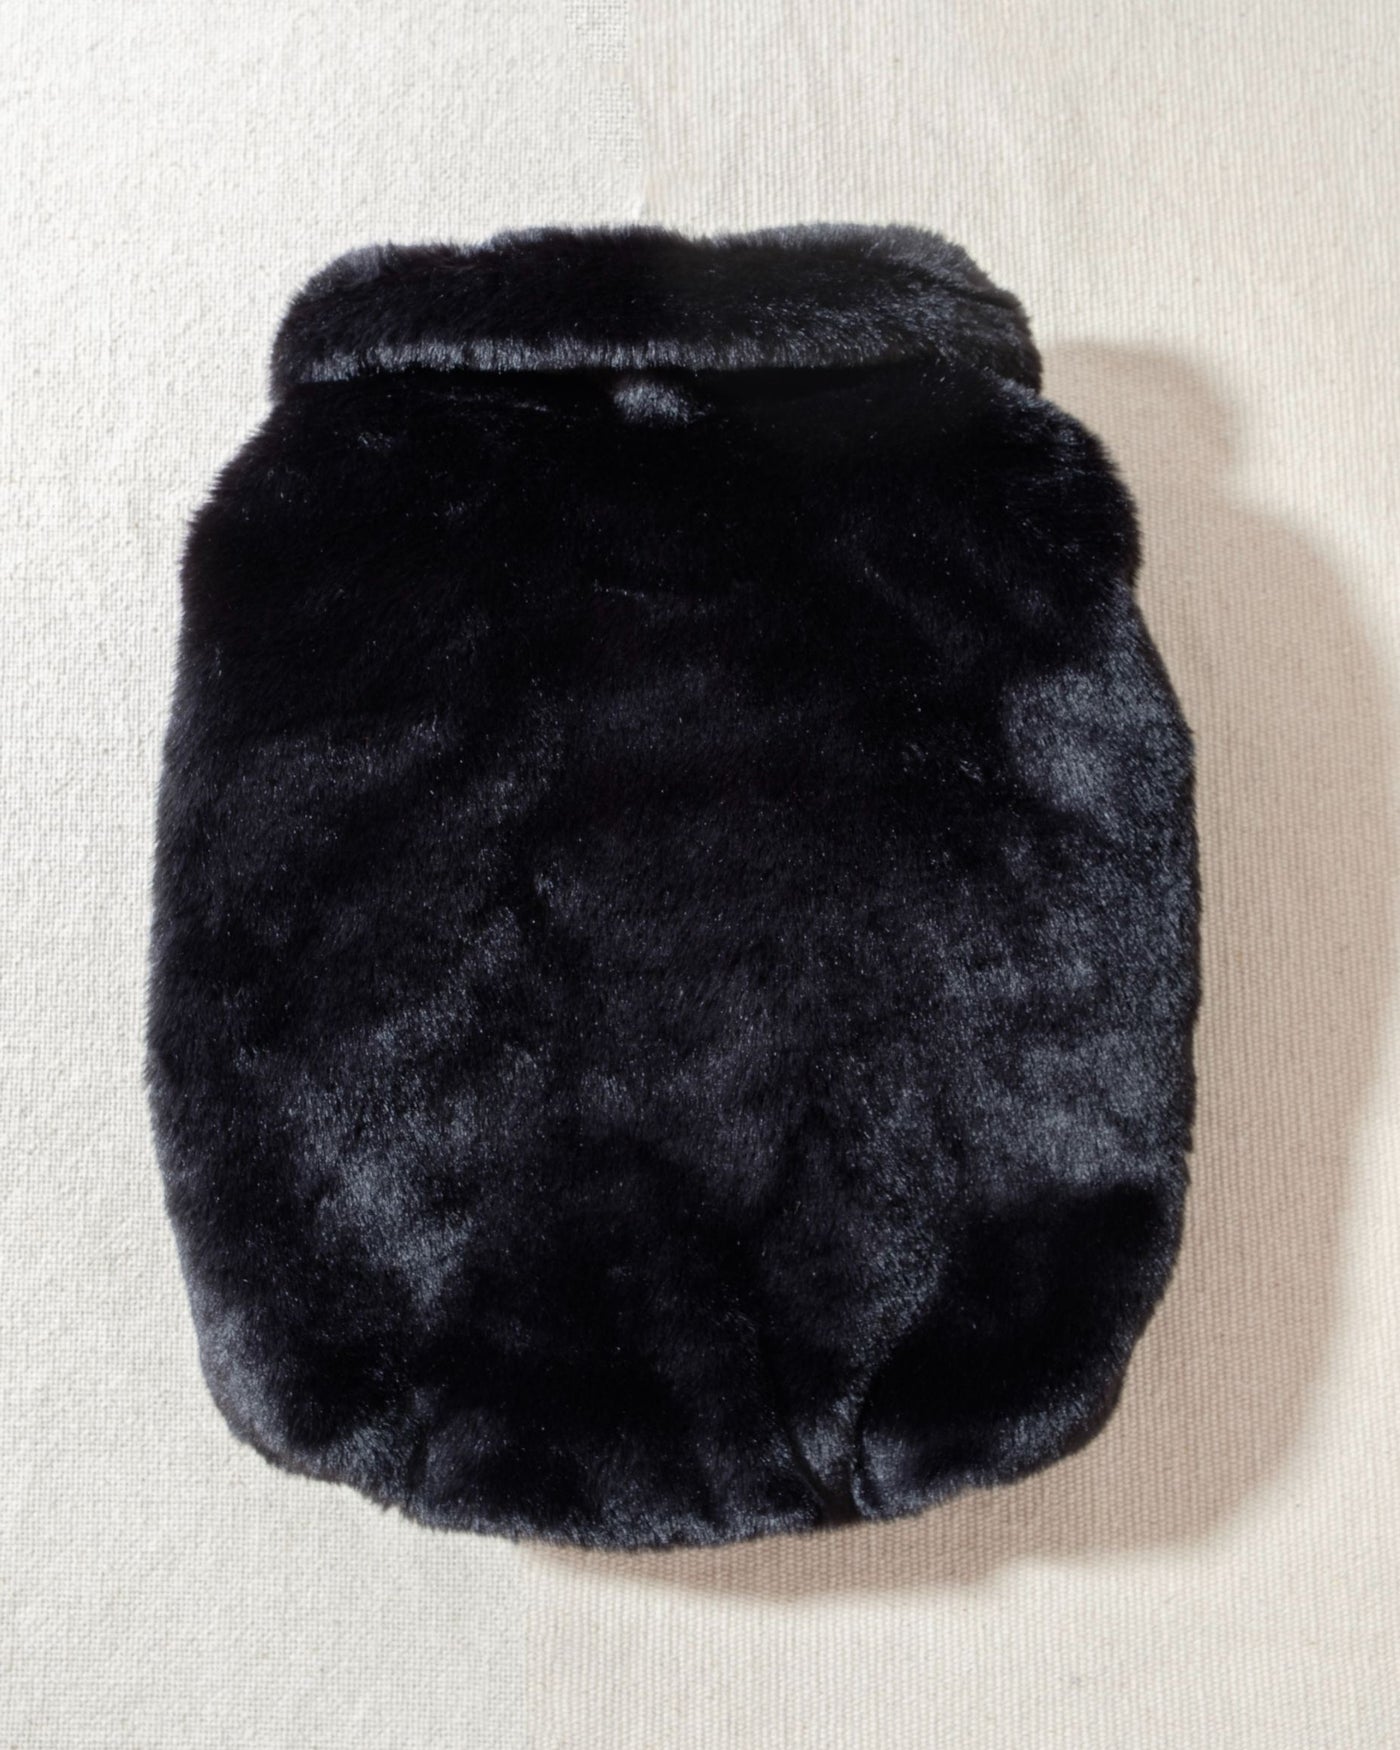 silky soft black faux fur and buttery ribbed leather accents. Matte, soft-feel snap buttons line the leather placket, leading to an oversized fur collar that wraps your fur babe in a warm hug. 